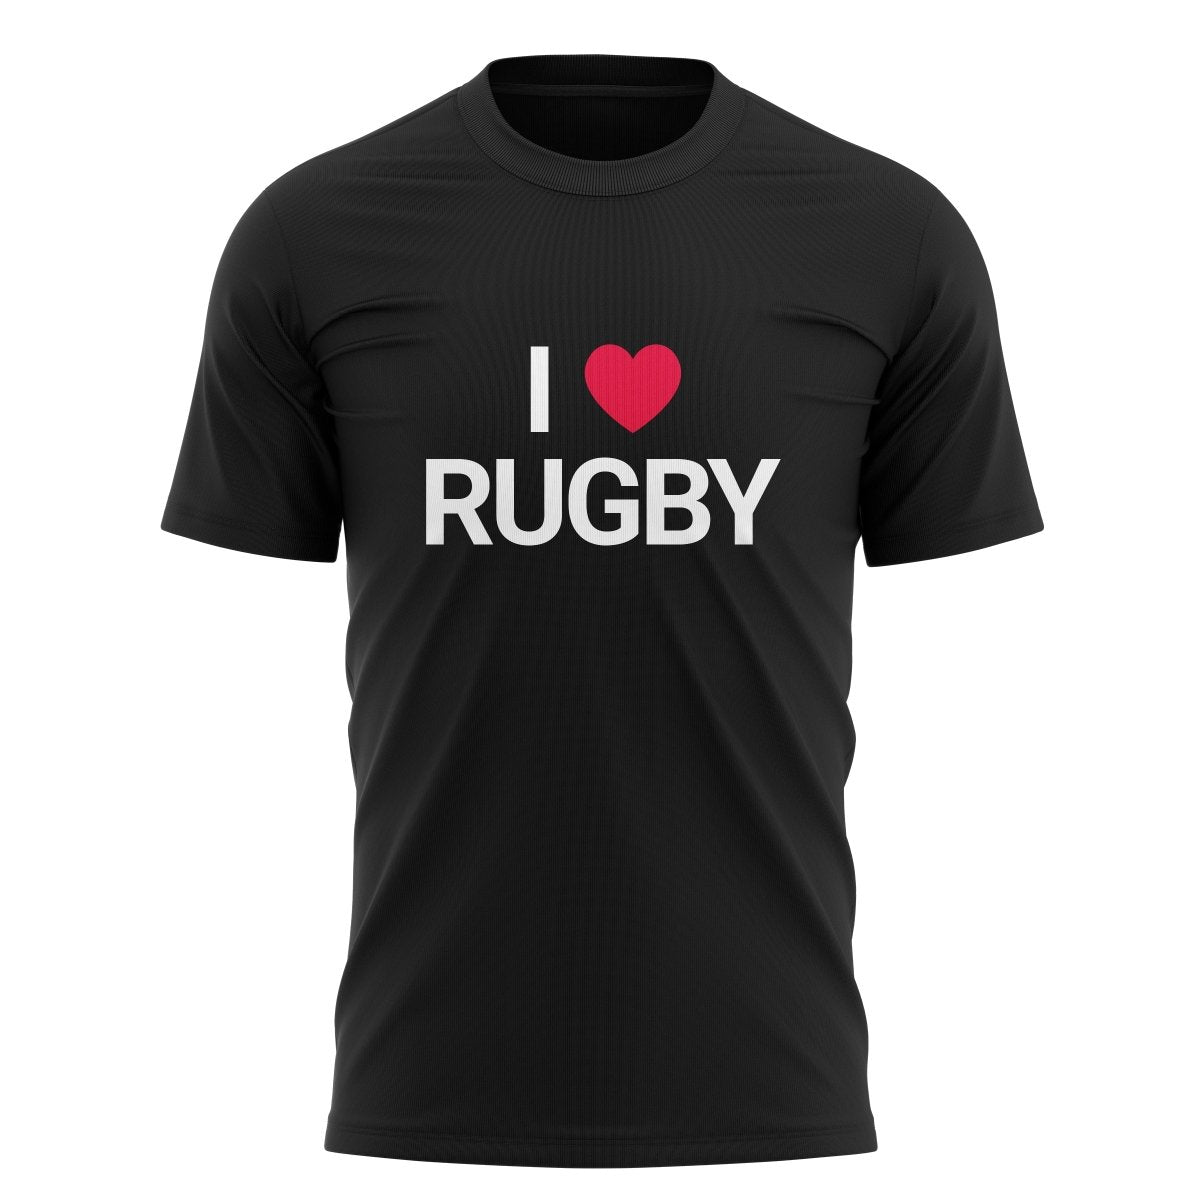 I Love Rugby Graphic Tee - www.therugbyshop.com www.therugbyshop.com MEN&#39;S / BLACK / S SANMAR TEES I Love Rugby Graphic Tee